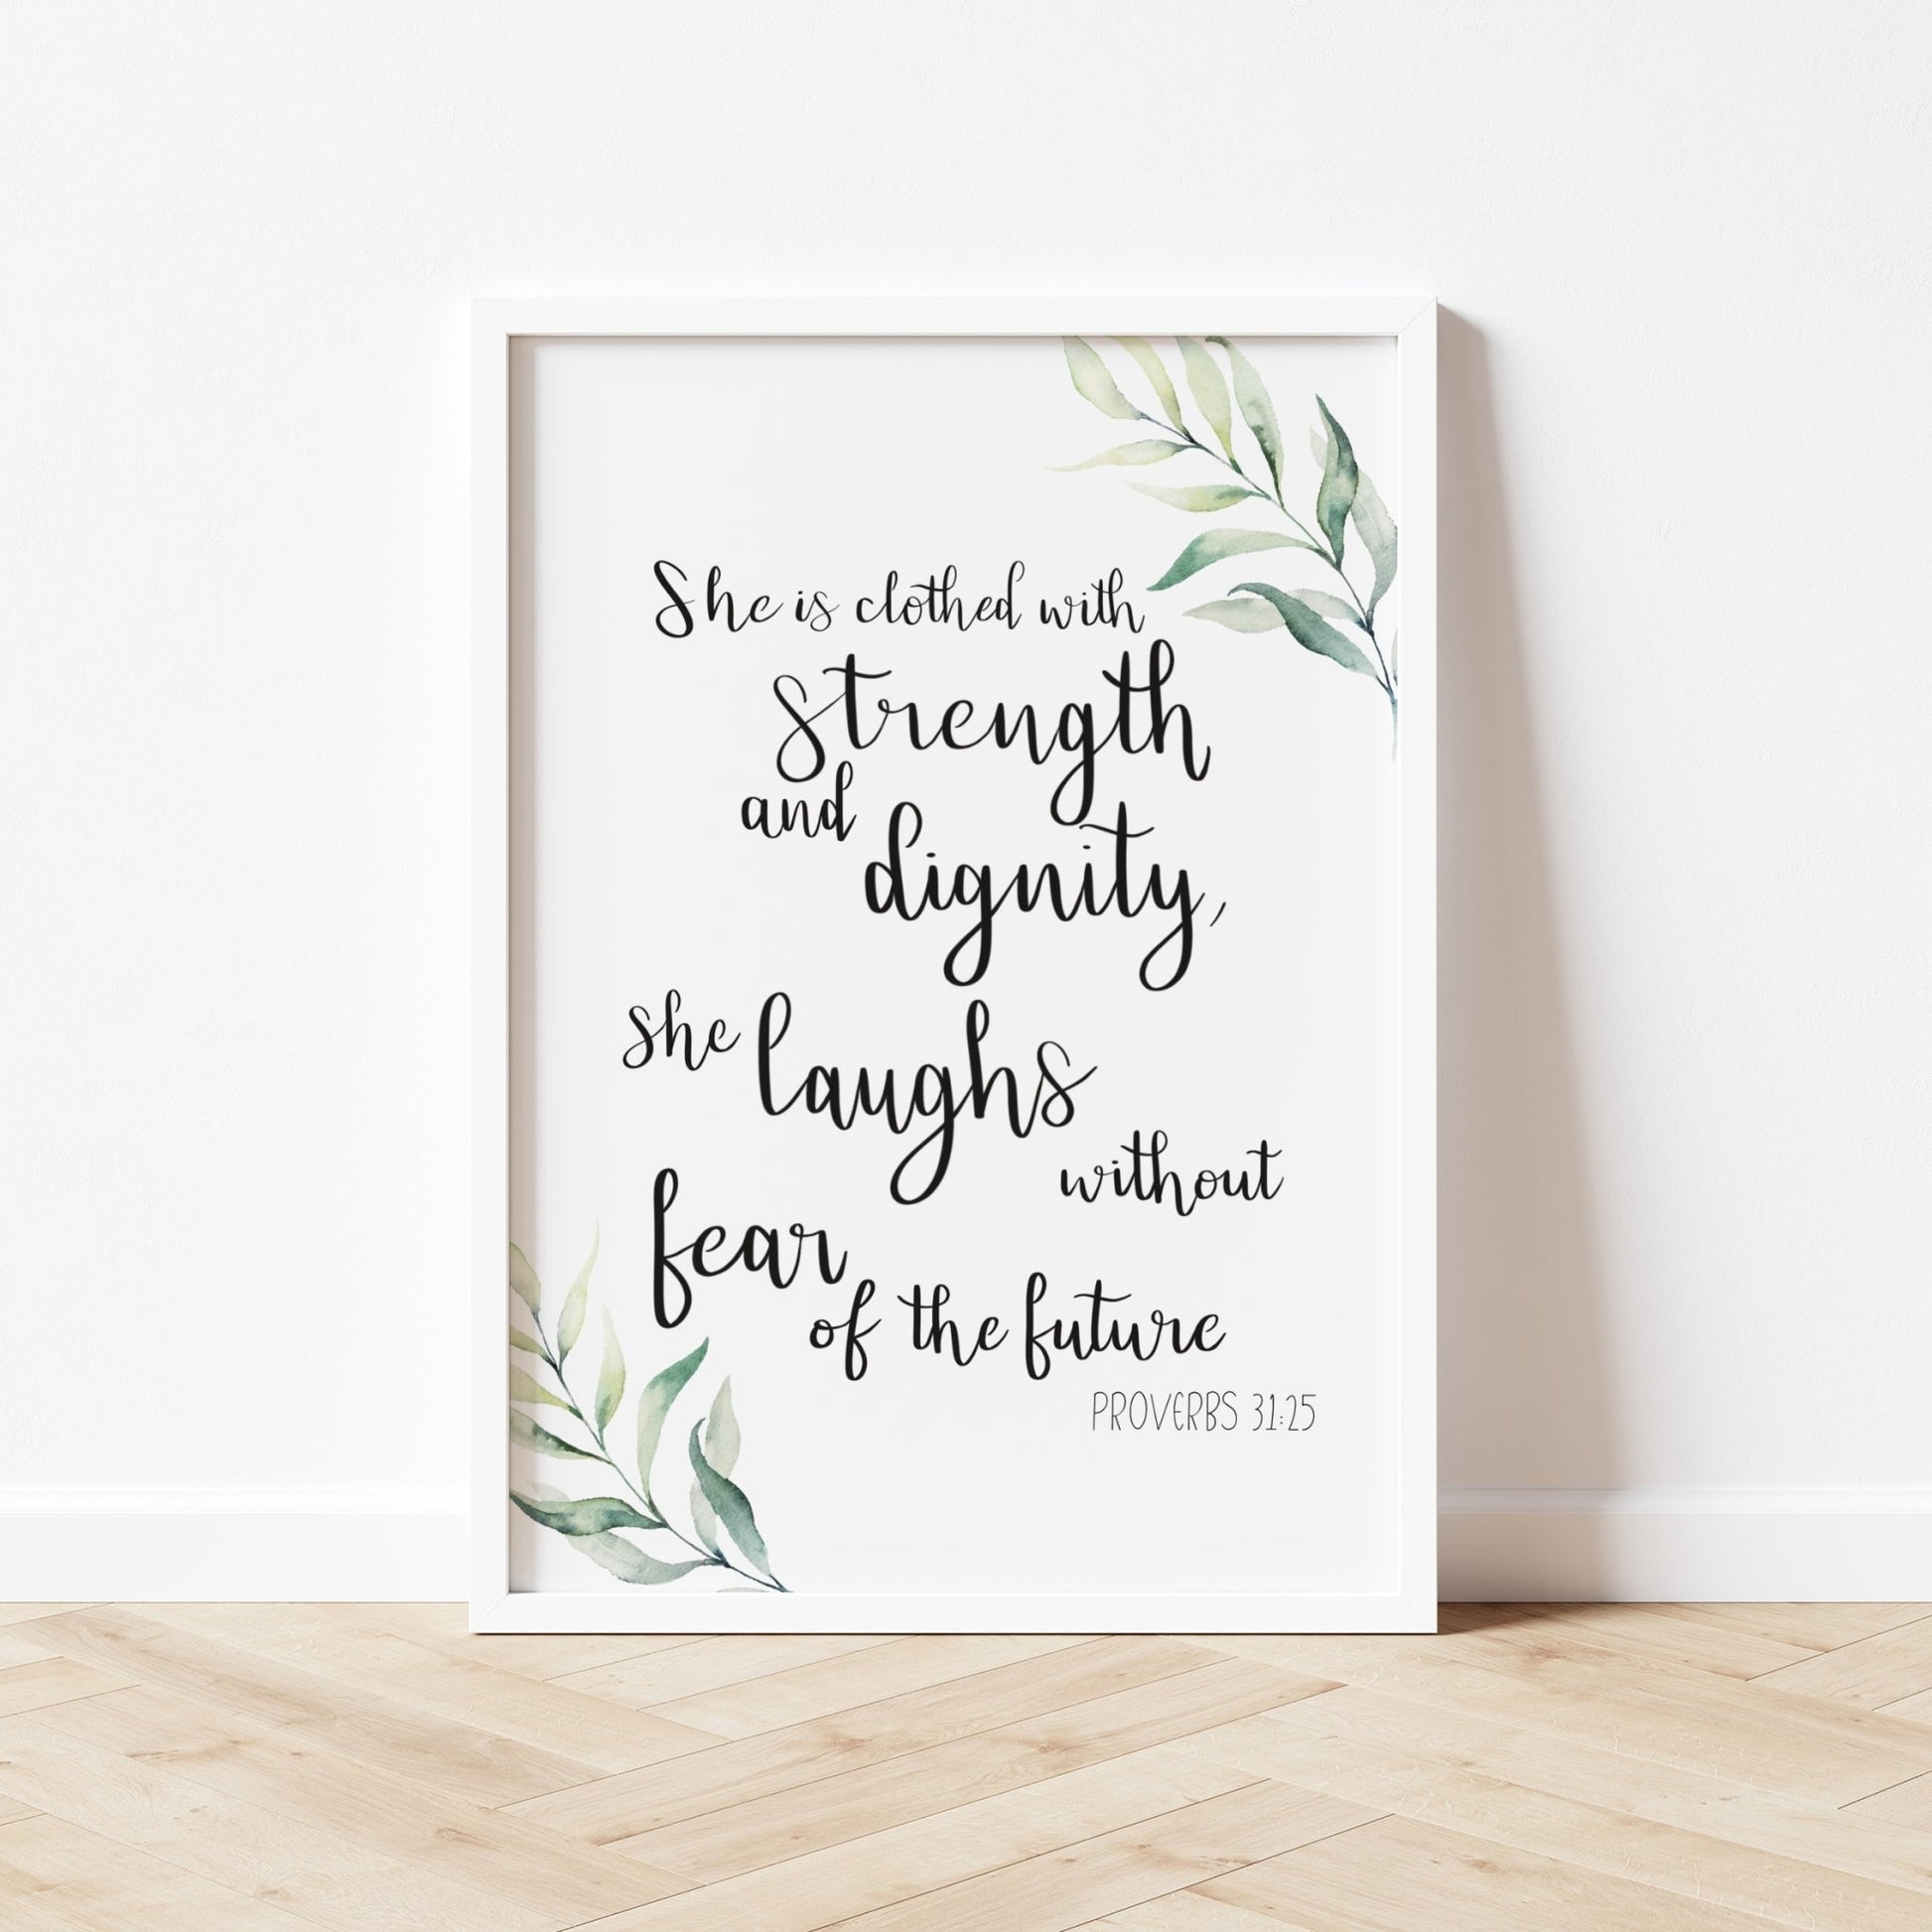 She clothed with strength and dignity watercolour print - Dolly and Fred Designs